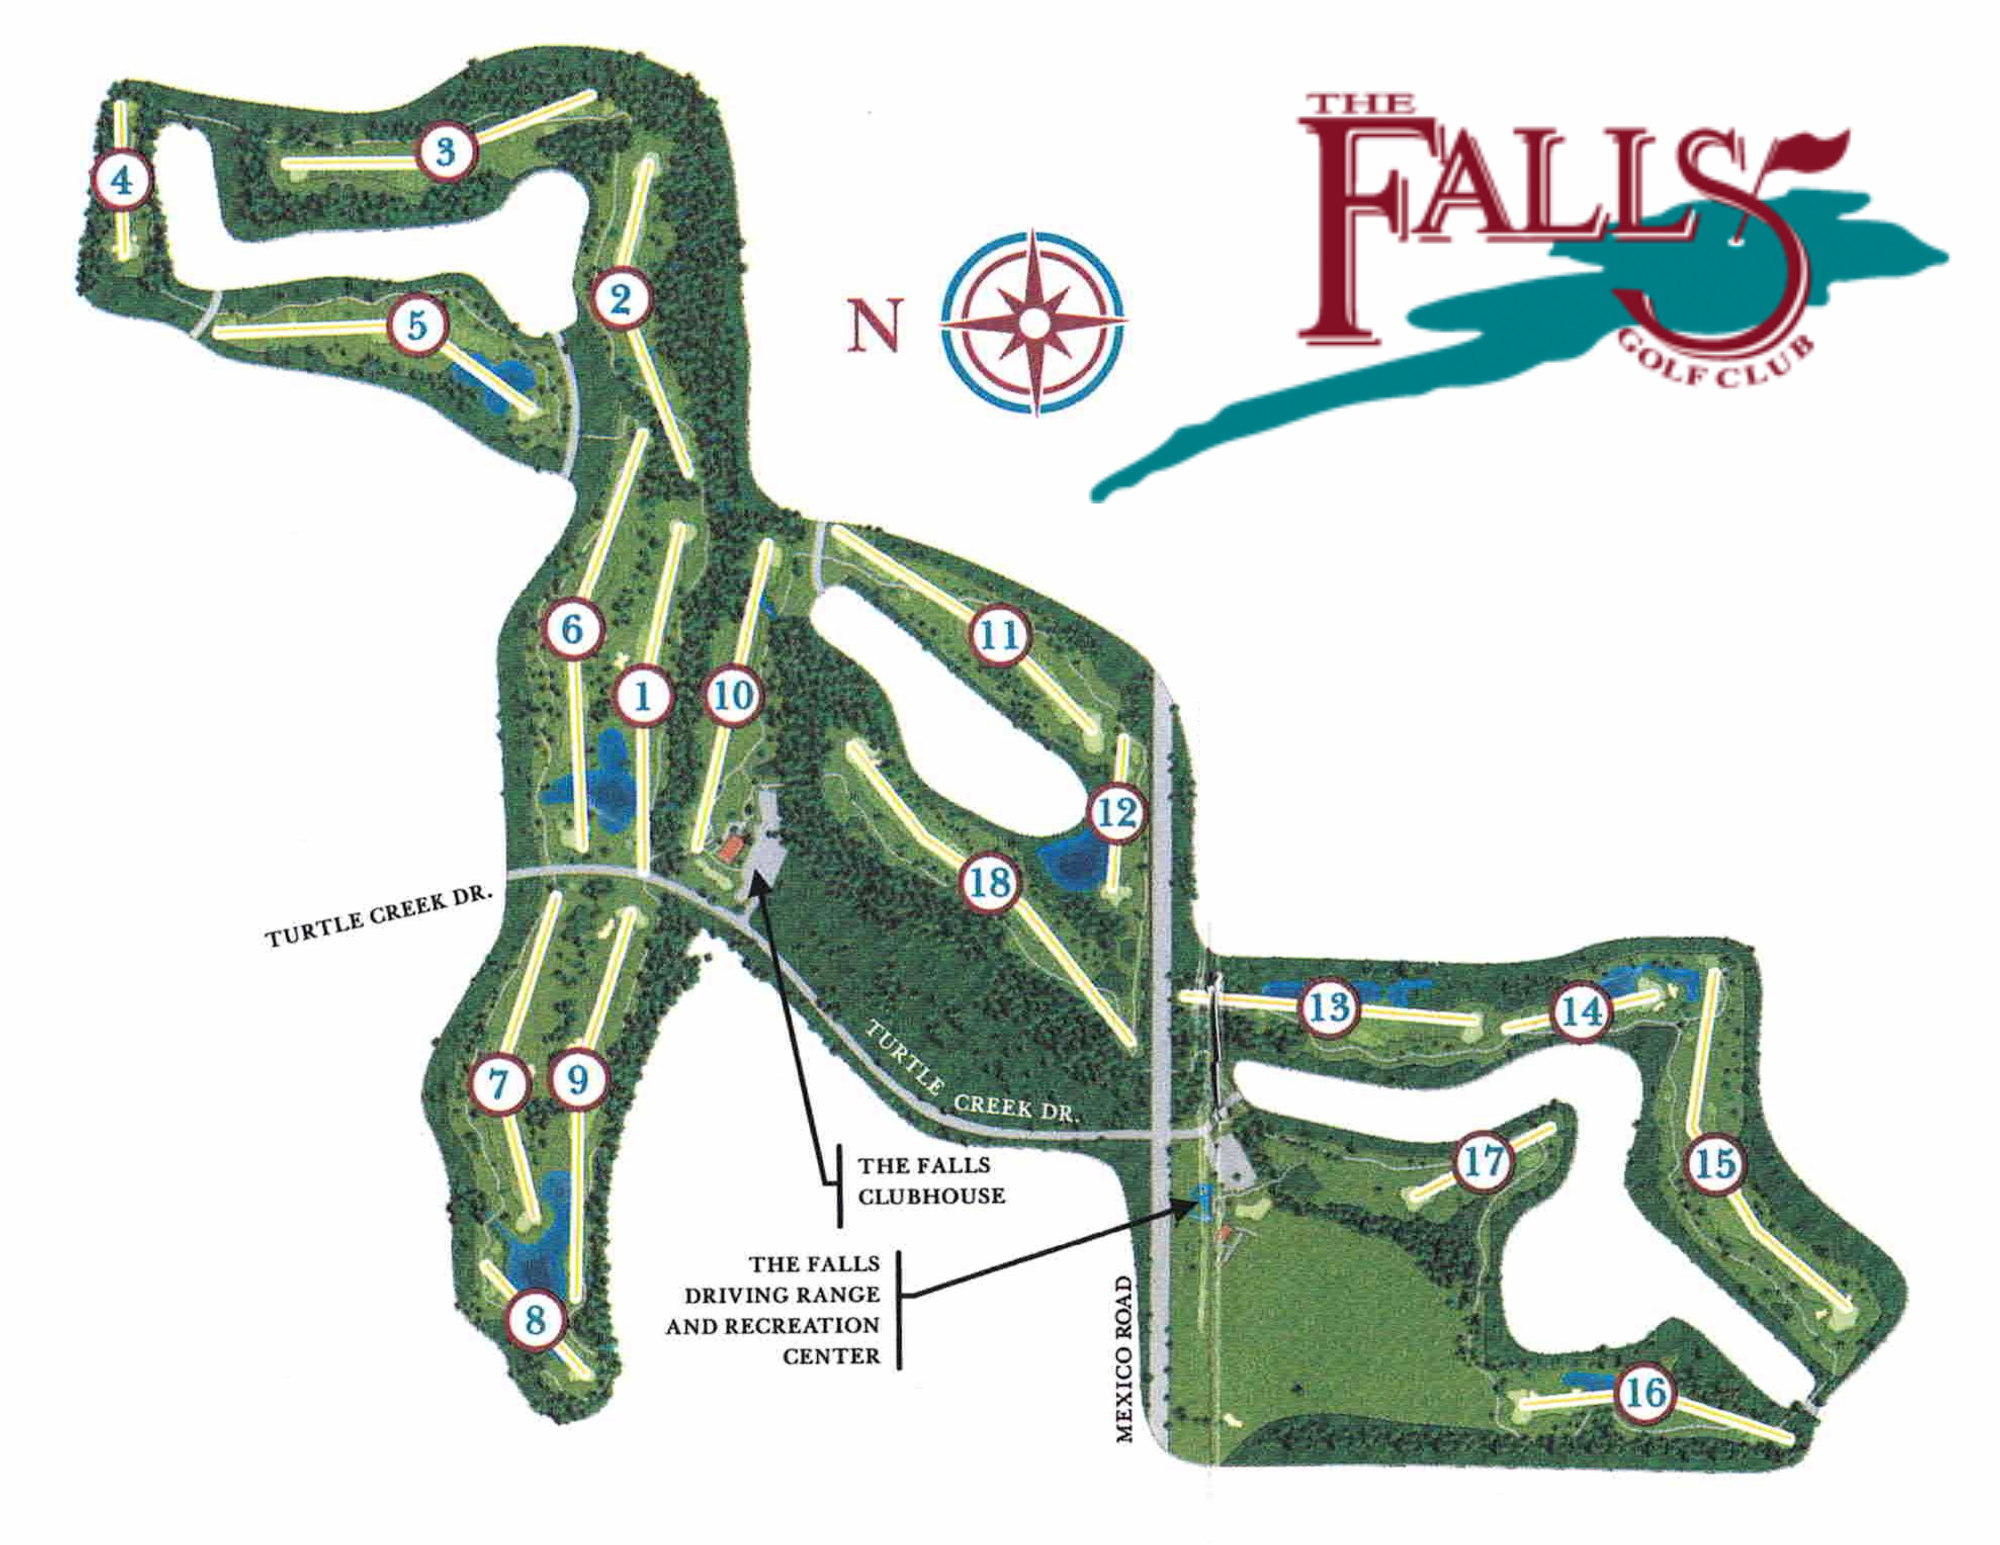 The Falls – Course Layout